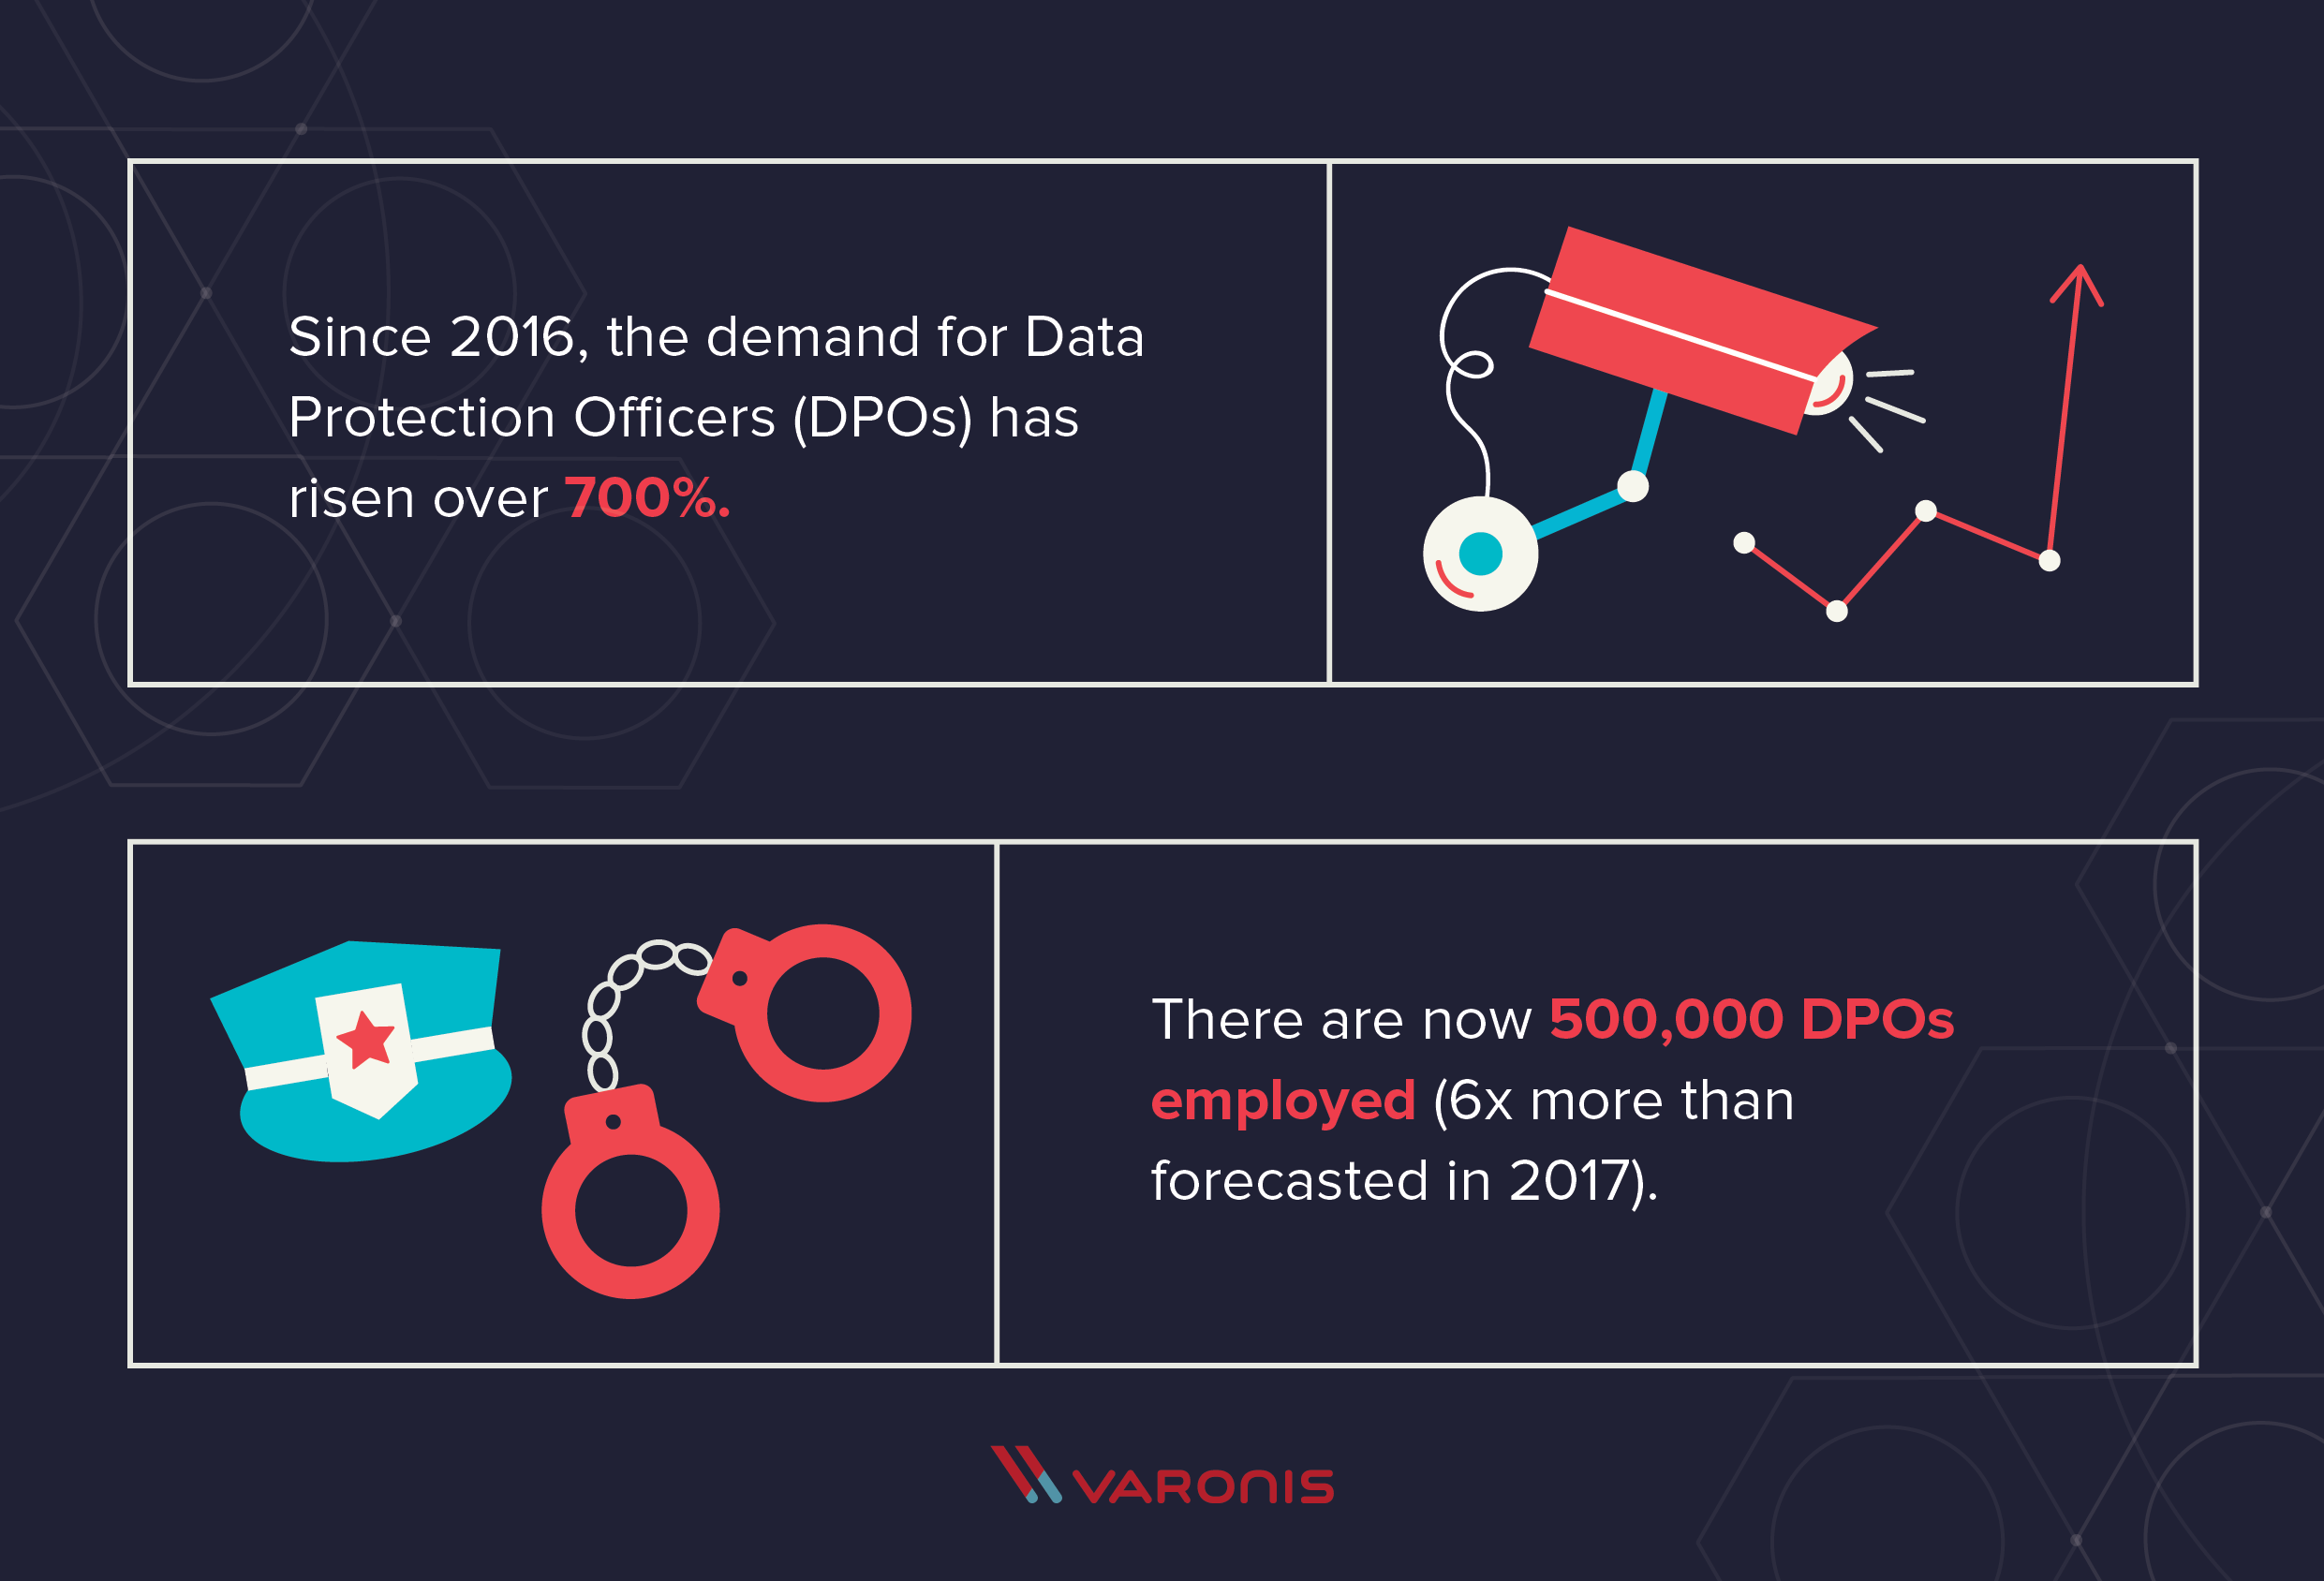 Since 2016, the demand for Data Protection Officers (DPOs) has risen over 700%. There are now 500,000 DPOs employed (6x more than forecasted in 2017).